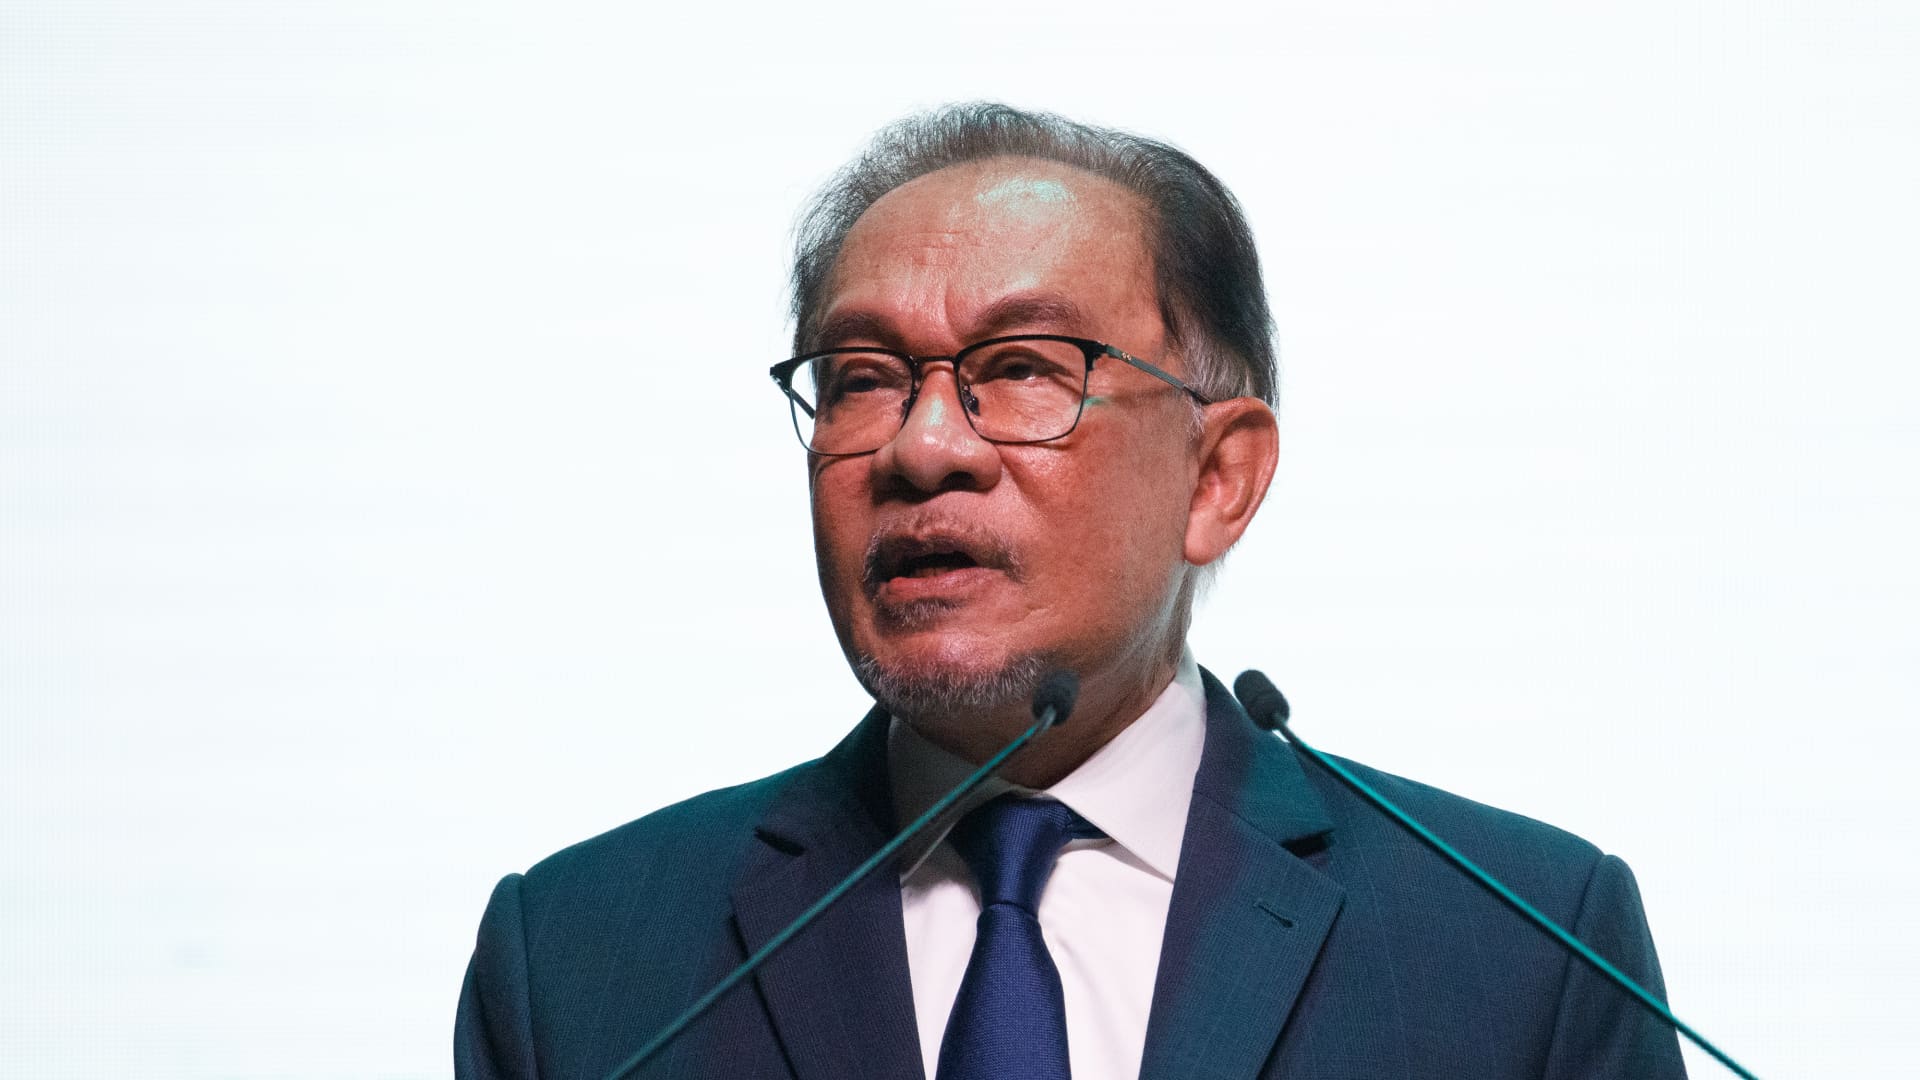 'Not realistic' for Malaysia to achieve net-zero by itself, says Prime Minister Anwar Ibrahim